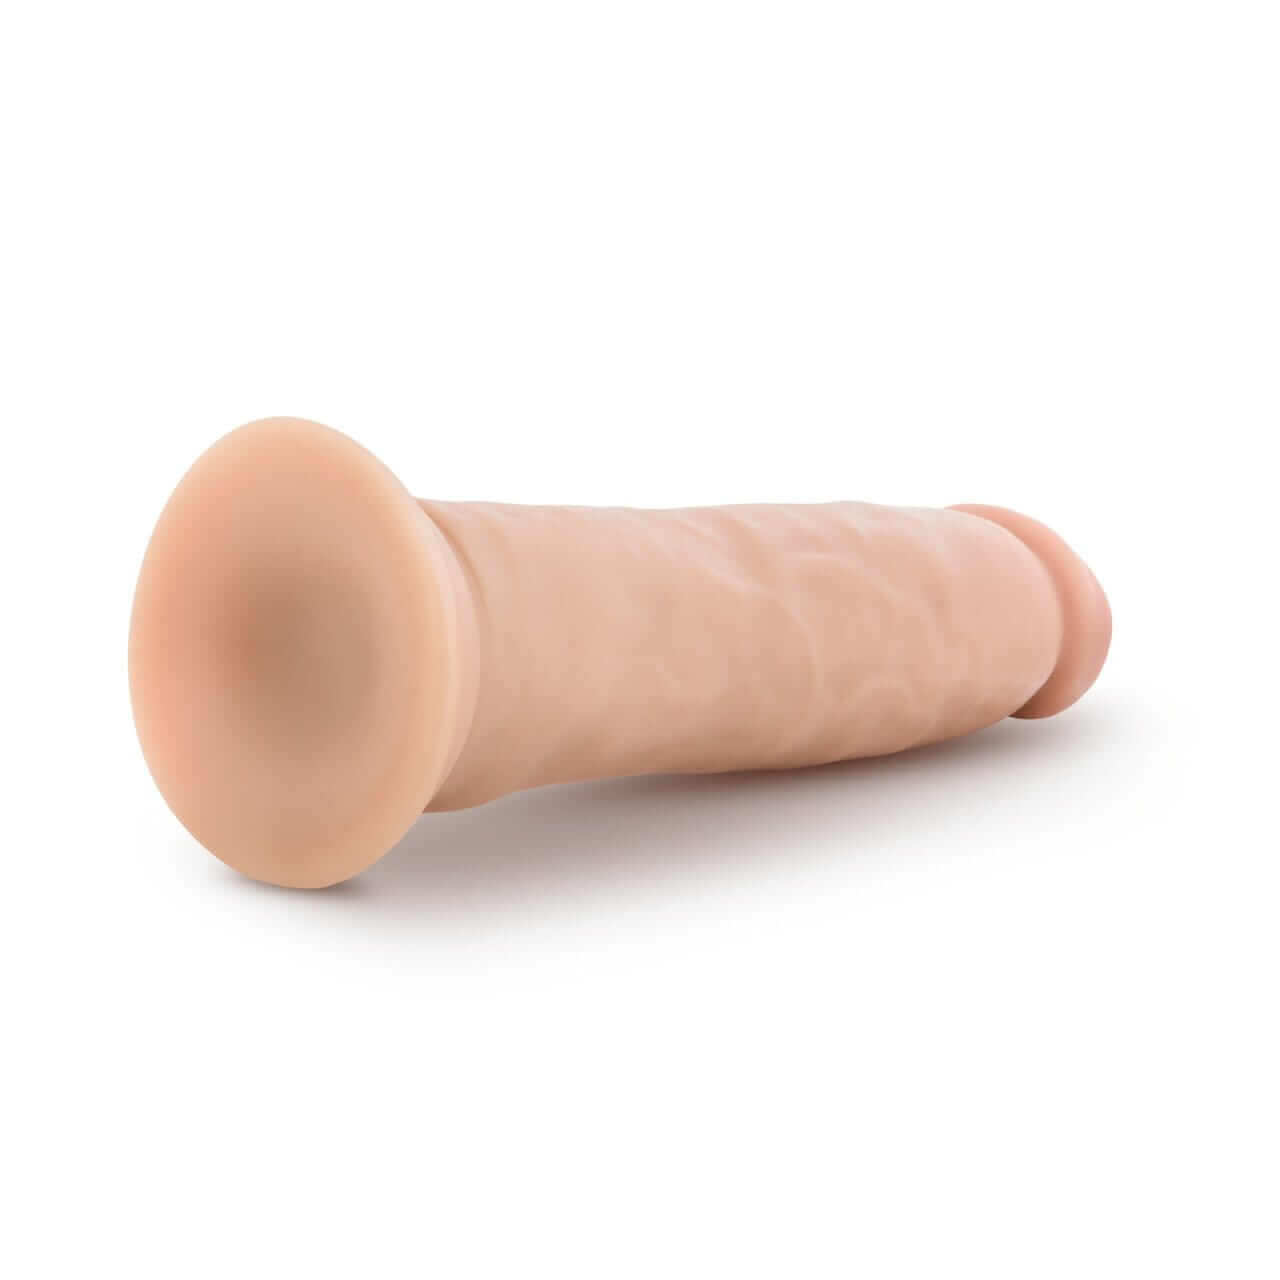 Dr. Skin 9.5 Inch Cock - Vanilla - Thorn & Feather Sex Toy Canada